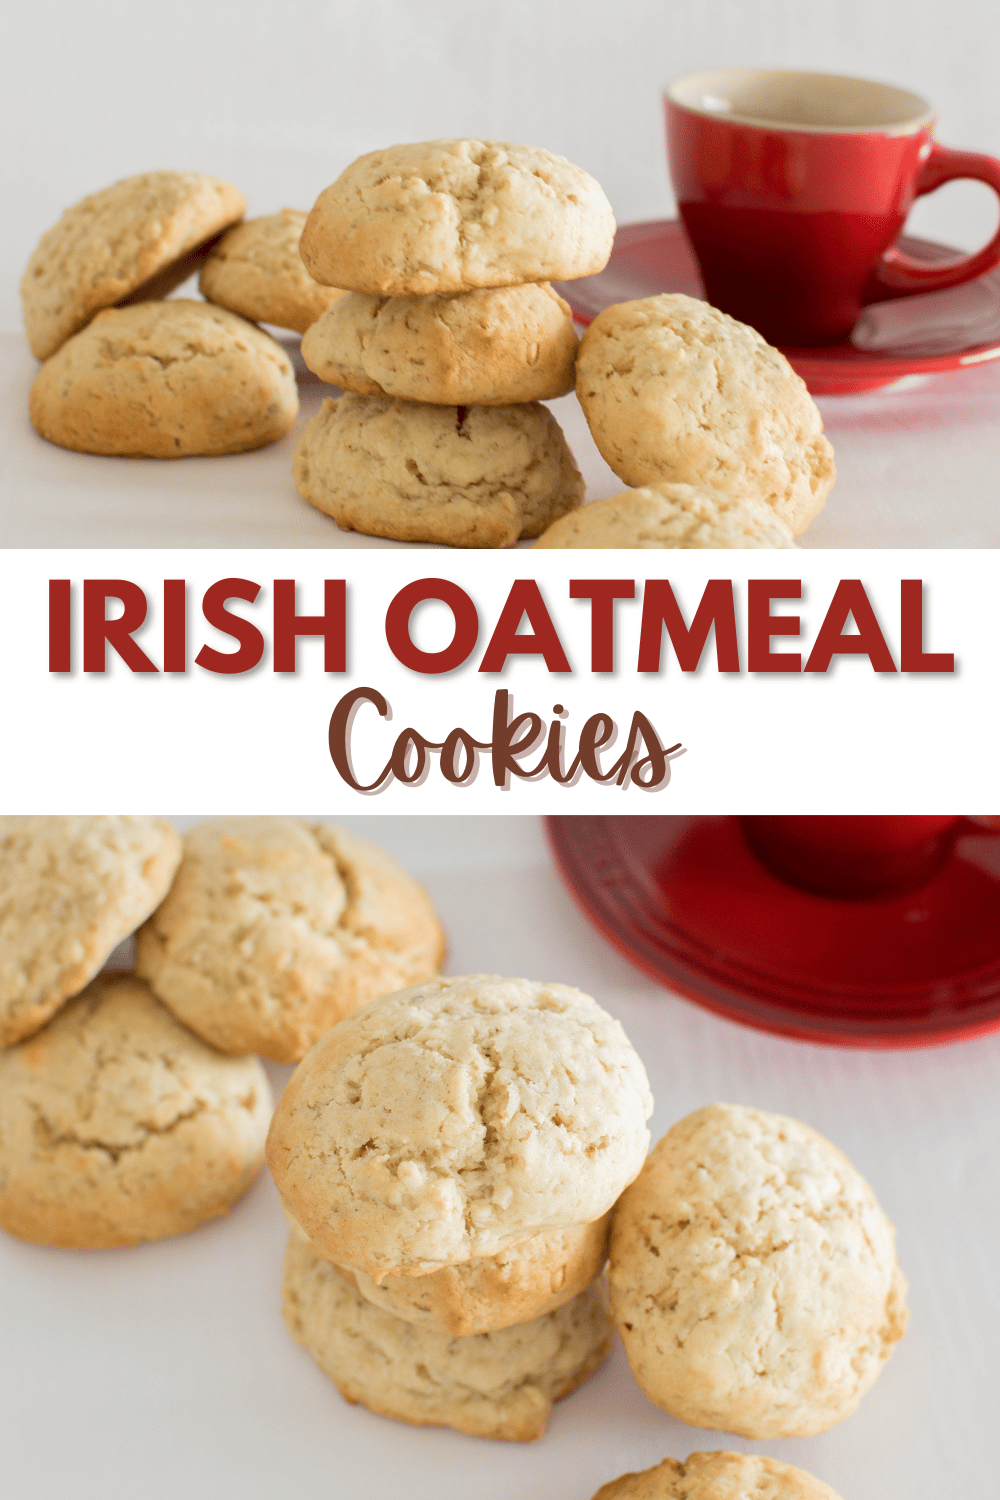 Irish Oatmeal Cookies are a classic recipe that have stood the test of time. They're slightly crispy on the outside with a chewy center. #irishoatmealcookies #irishoatmeal #oatmealcookies #stpatricksday #cookies via @wondermomwannab